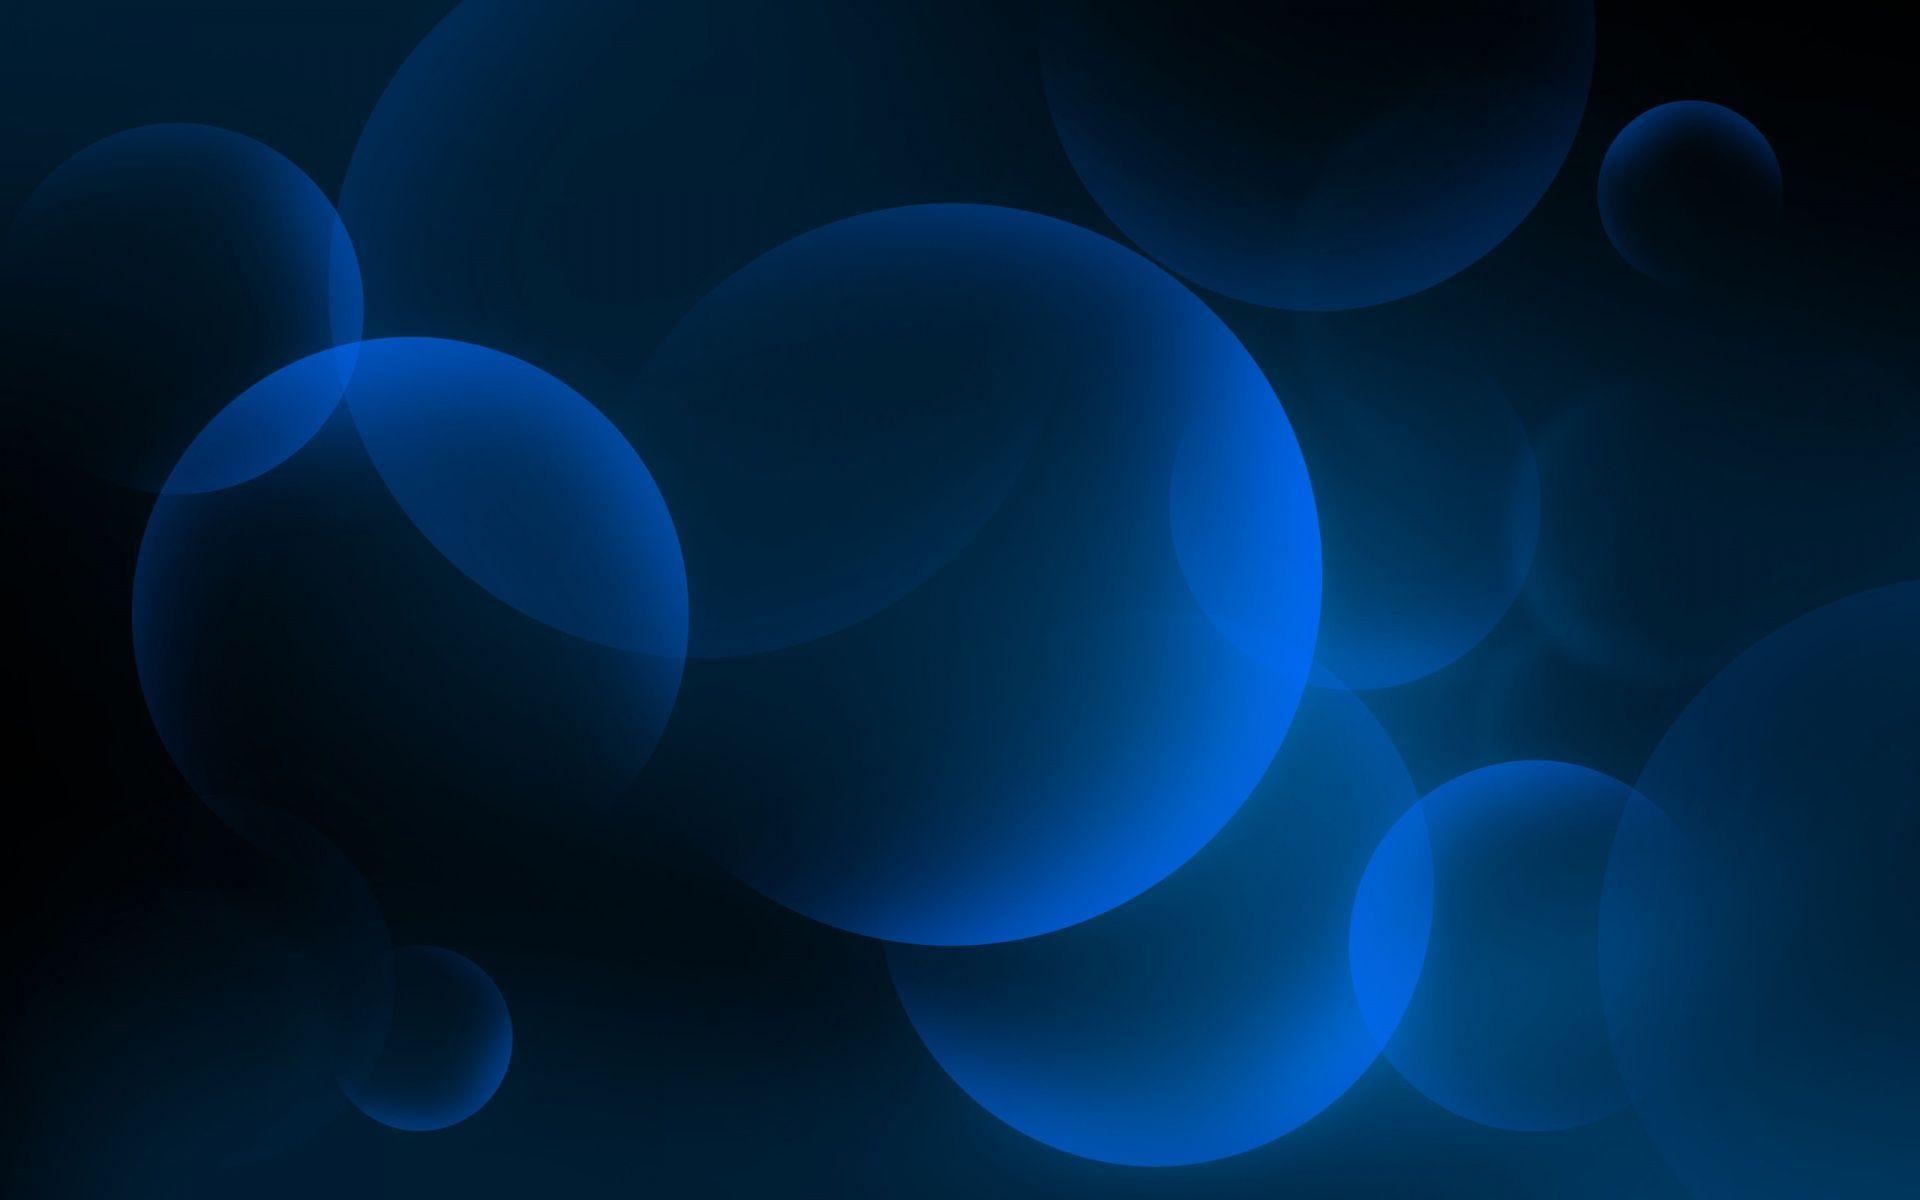 Wallpaper ID 450054  Abstract Bubble Phone Wallpaper Blue 720x1280 free  download